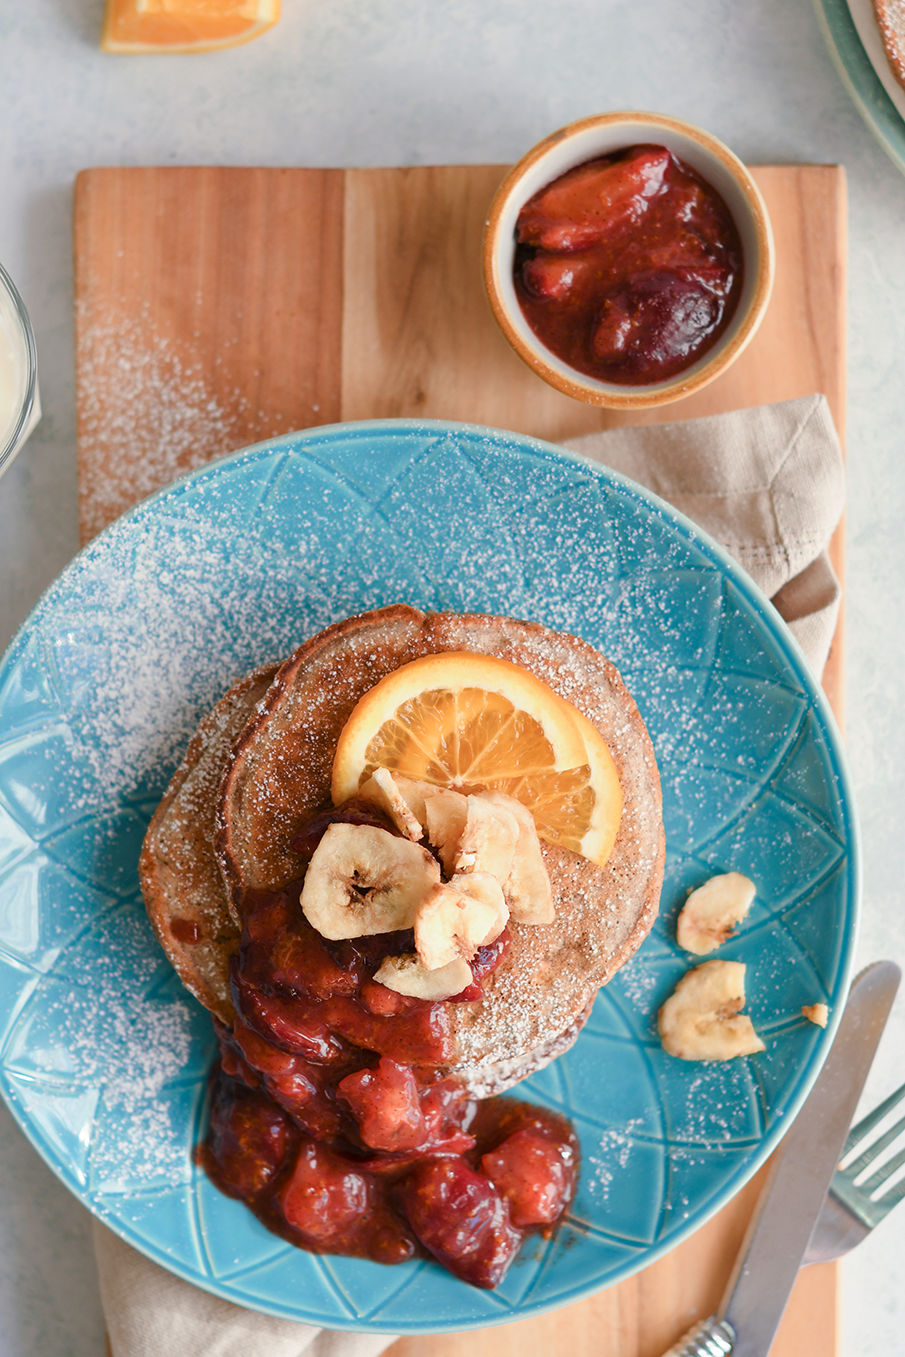 Cinnamon oat and banana pancakes with spiced plums